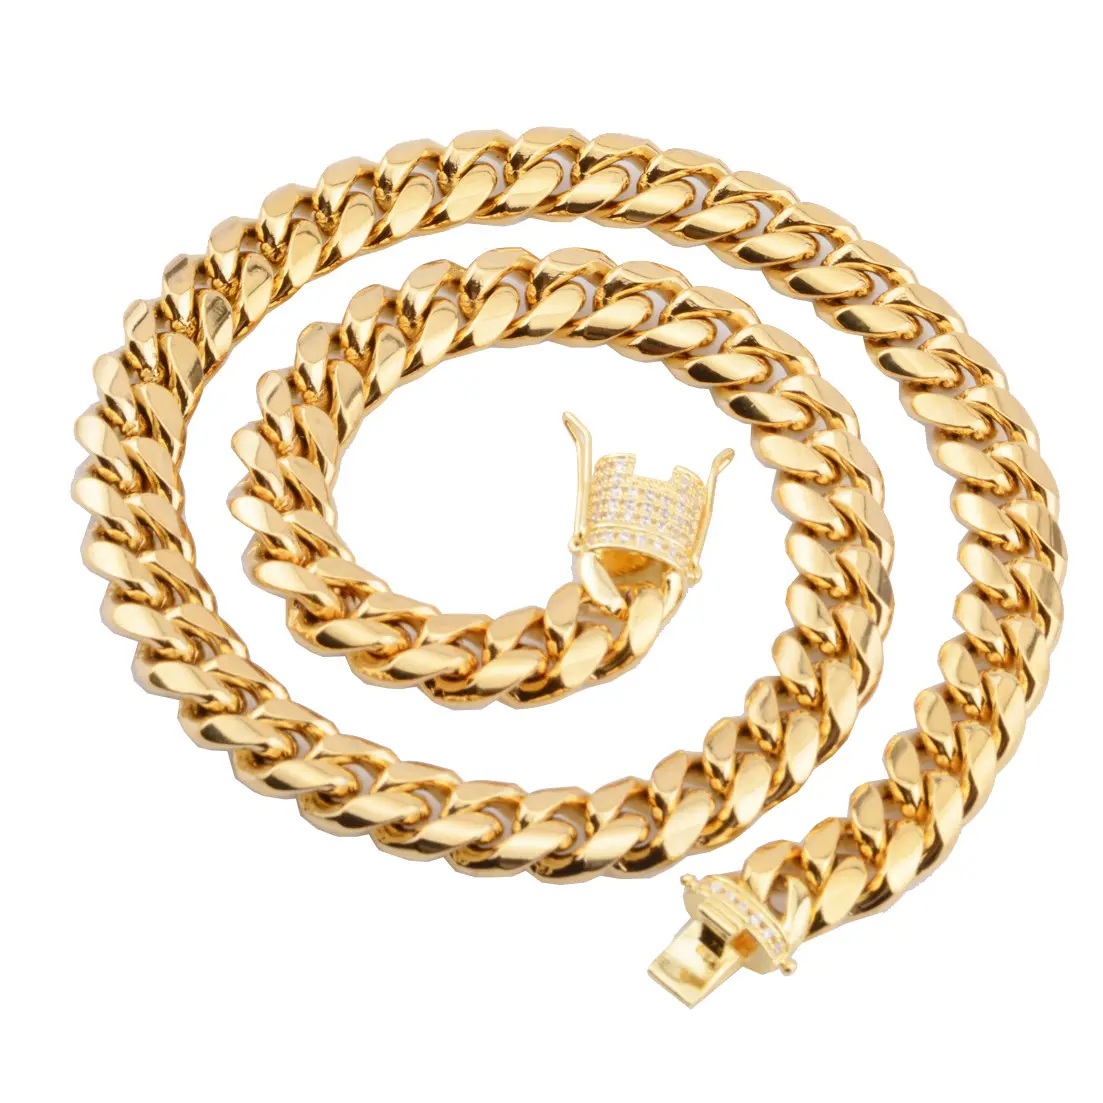 2021 Hot Selling Gold Plated Jewelry Hips Hops 12mm Solid 18K Gold Filled Iced Out Stainless Steel Curb Miami Cuban Link Chain